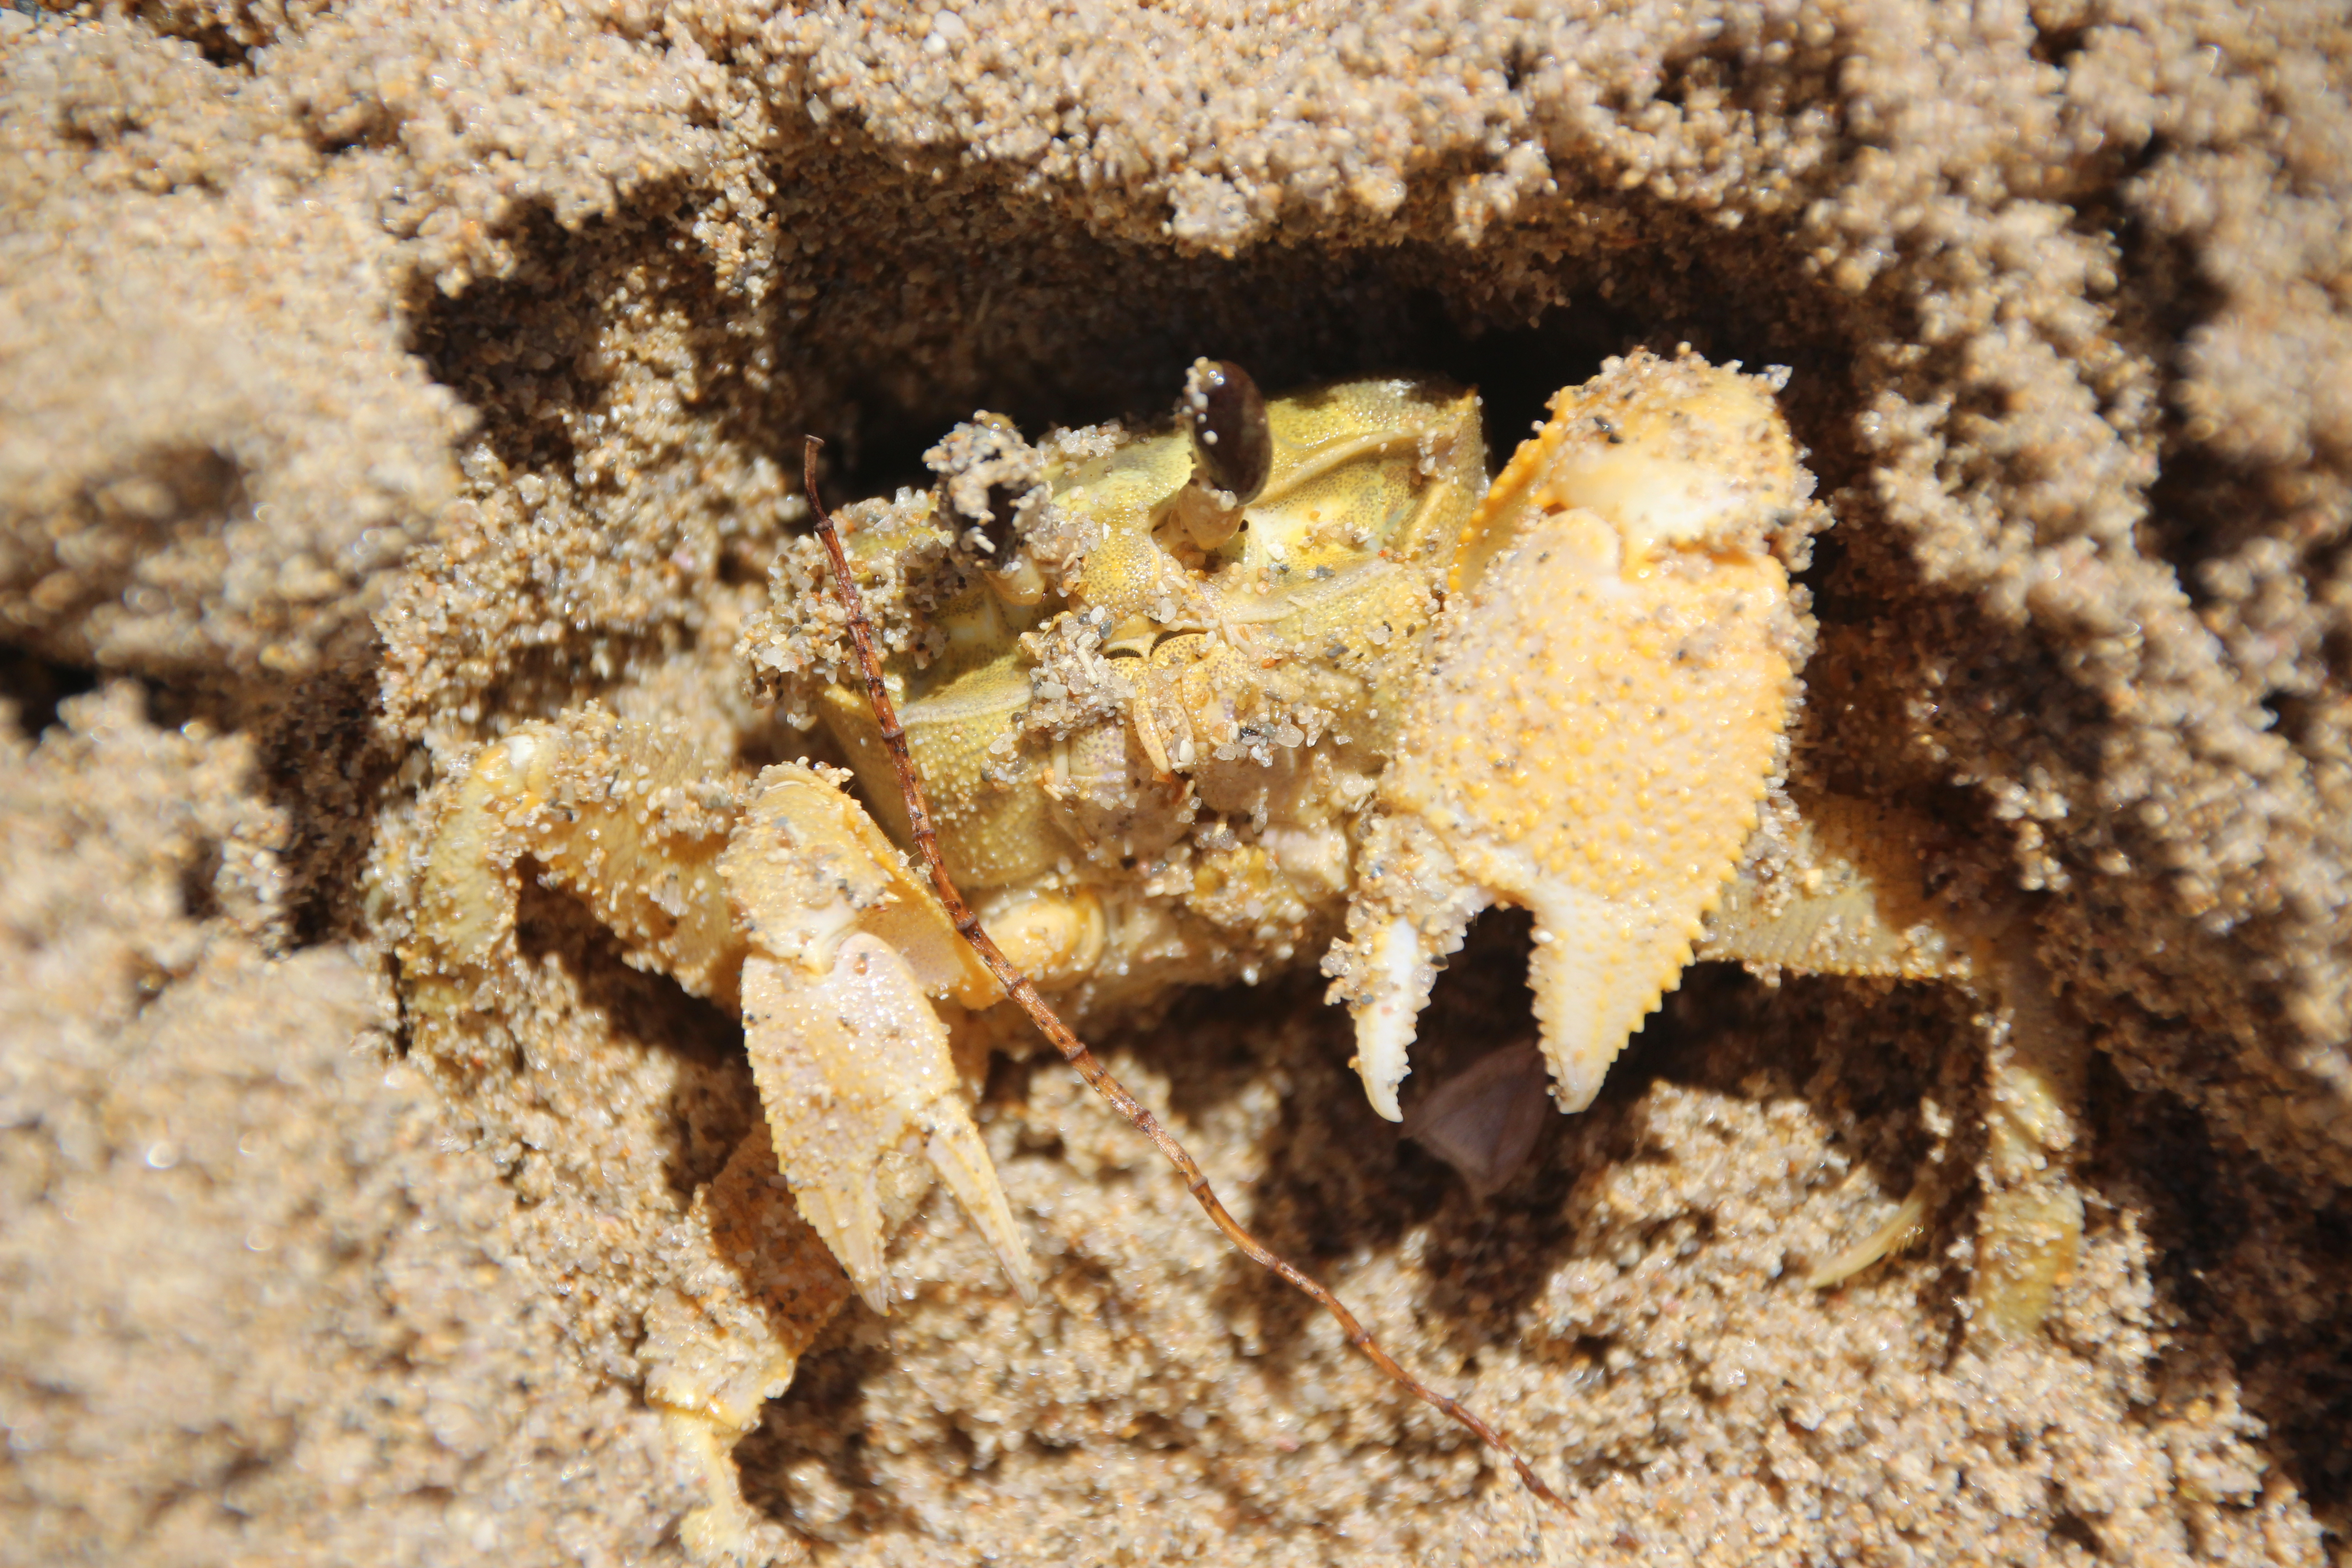 A golden ghost crab. Pic: Caitlin Rae